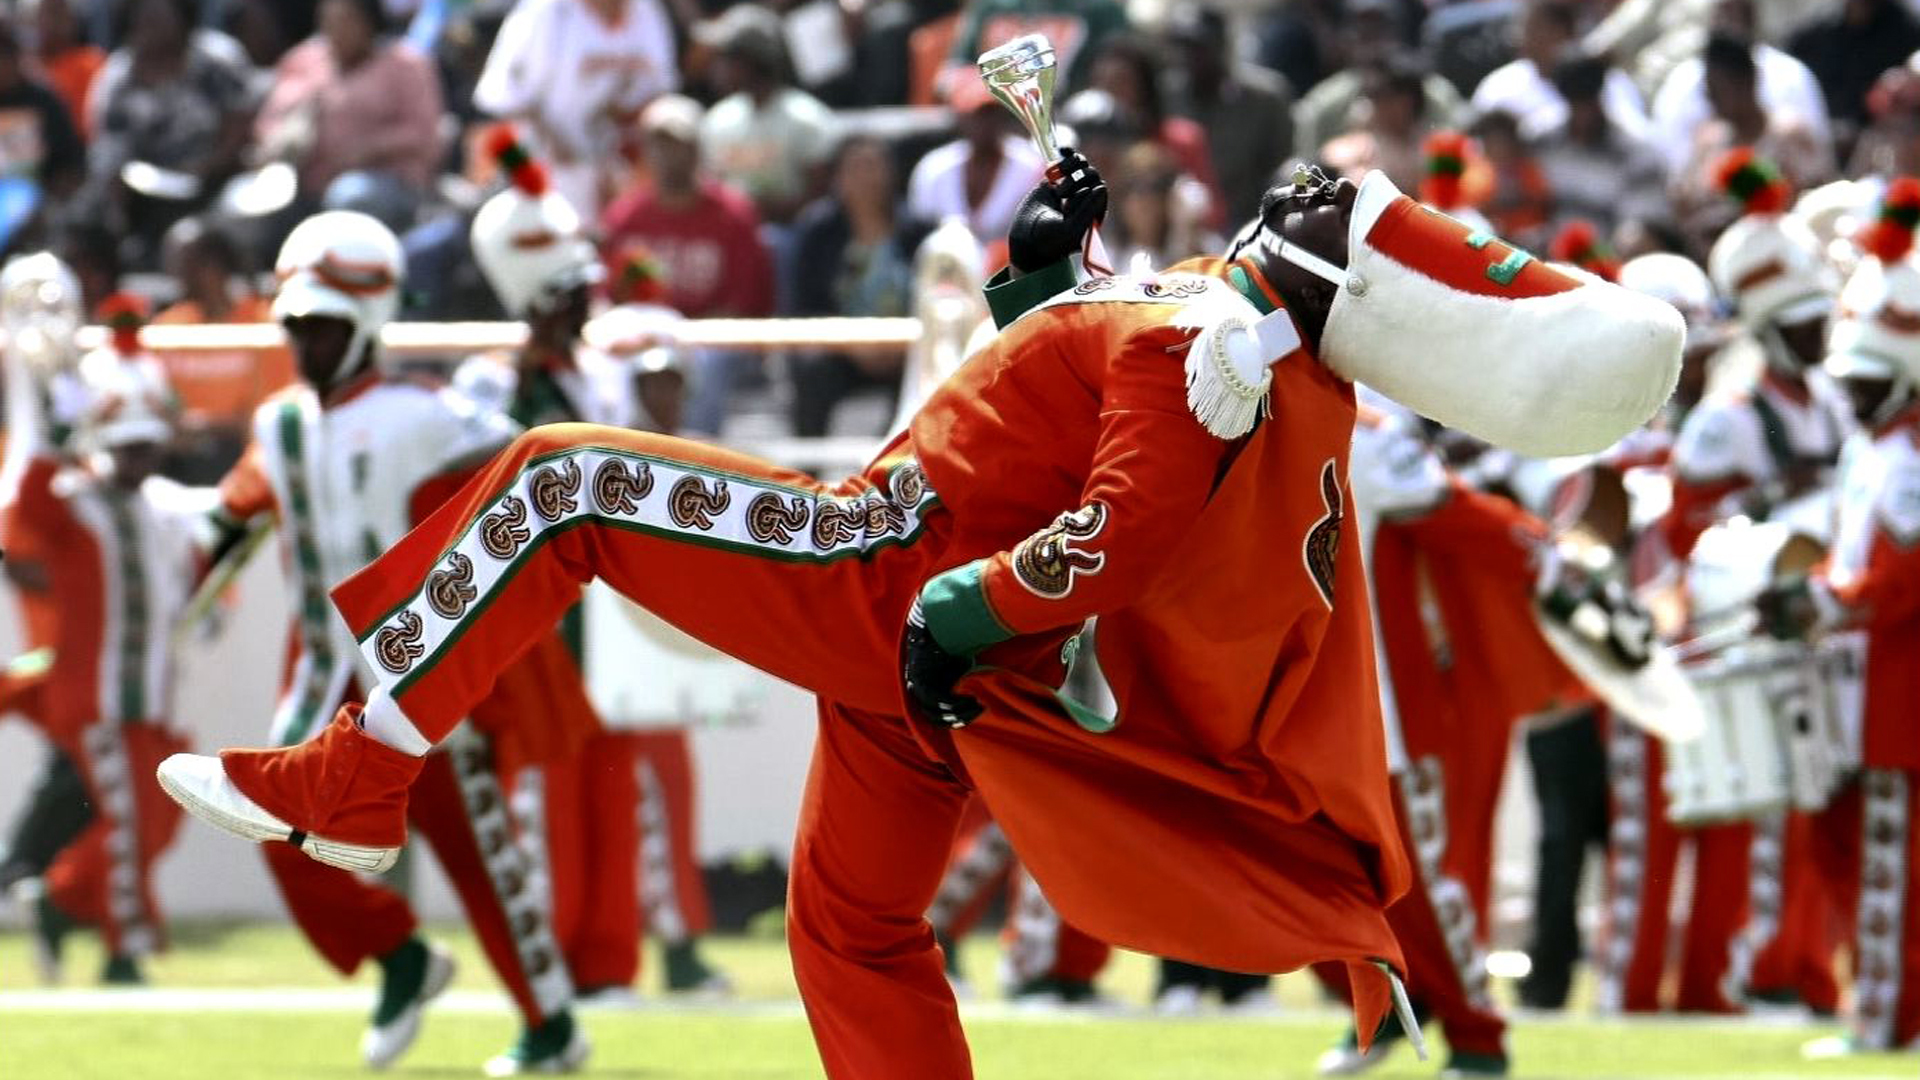 Ineligible band members implicated in FAMU hazing death of Robert Champion  - CBS News